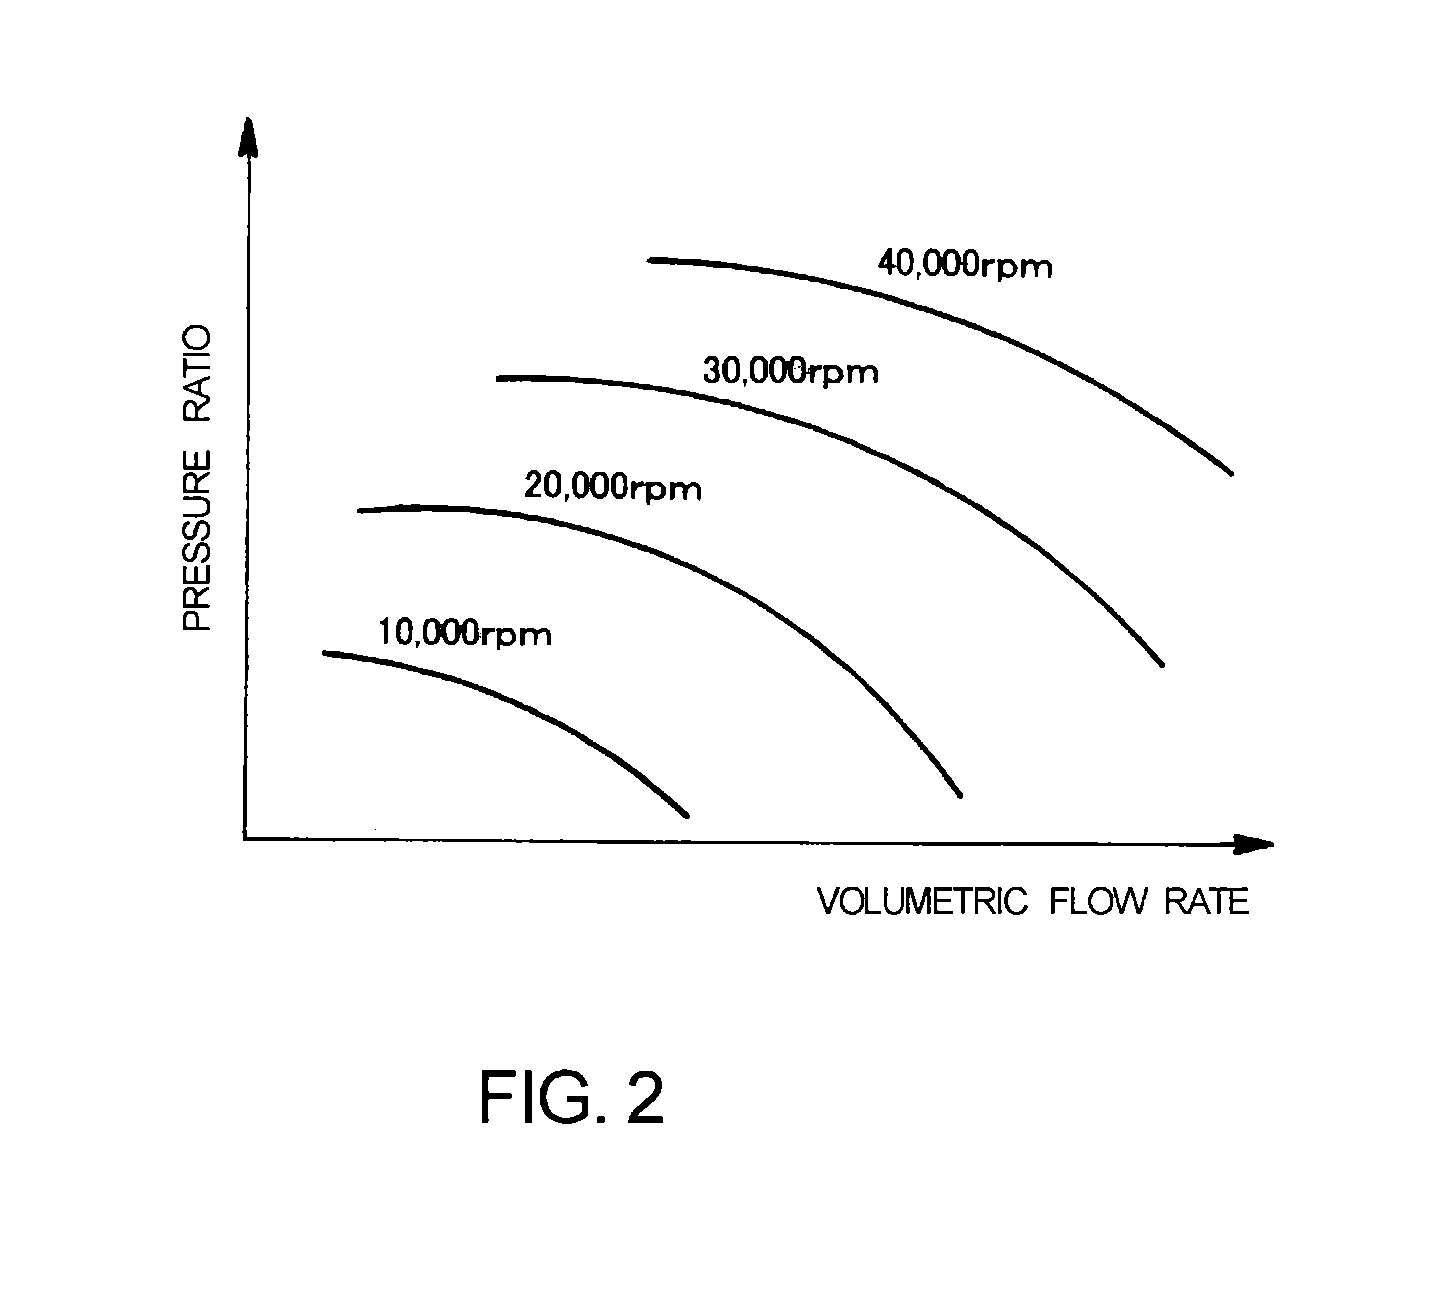 Turbo rotational frequency detection device